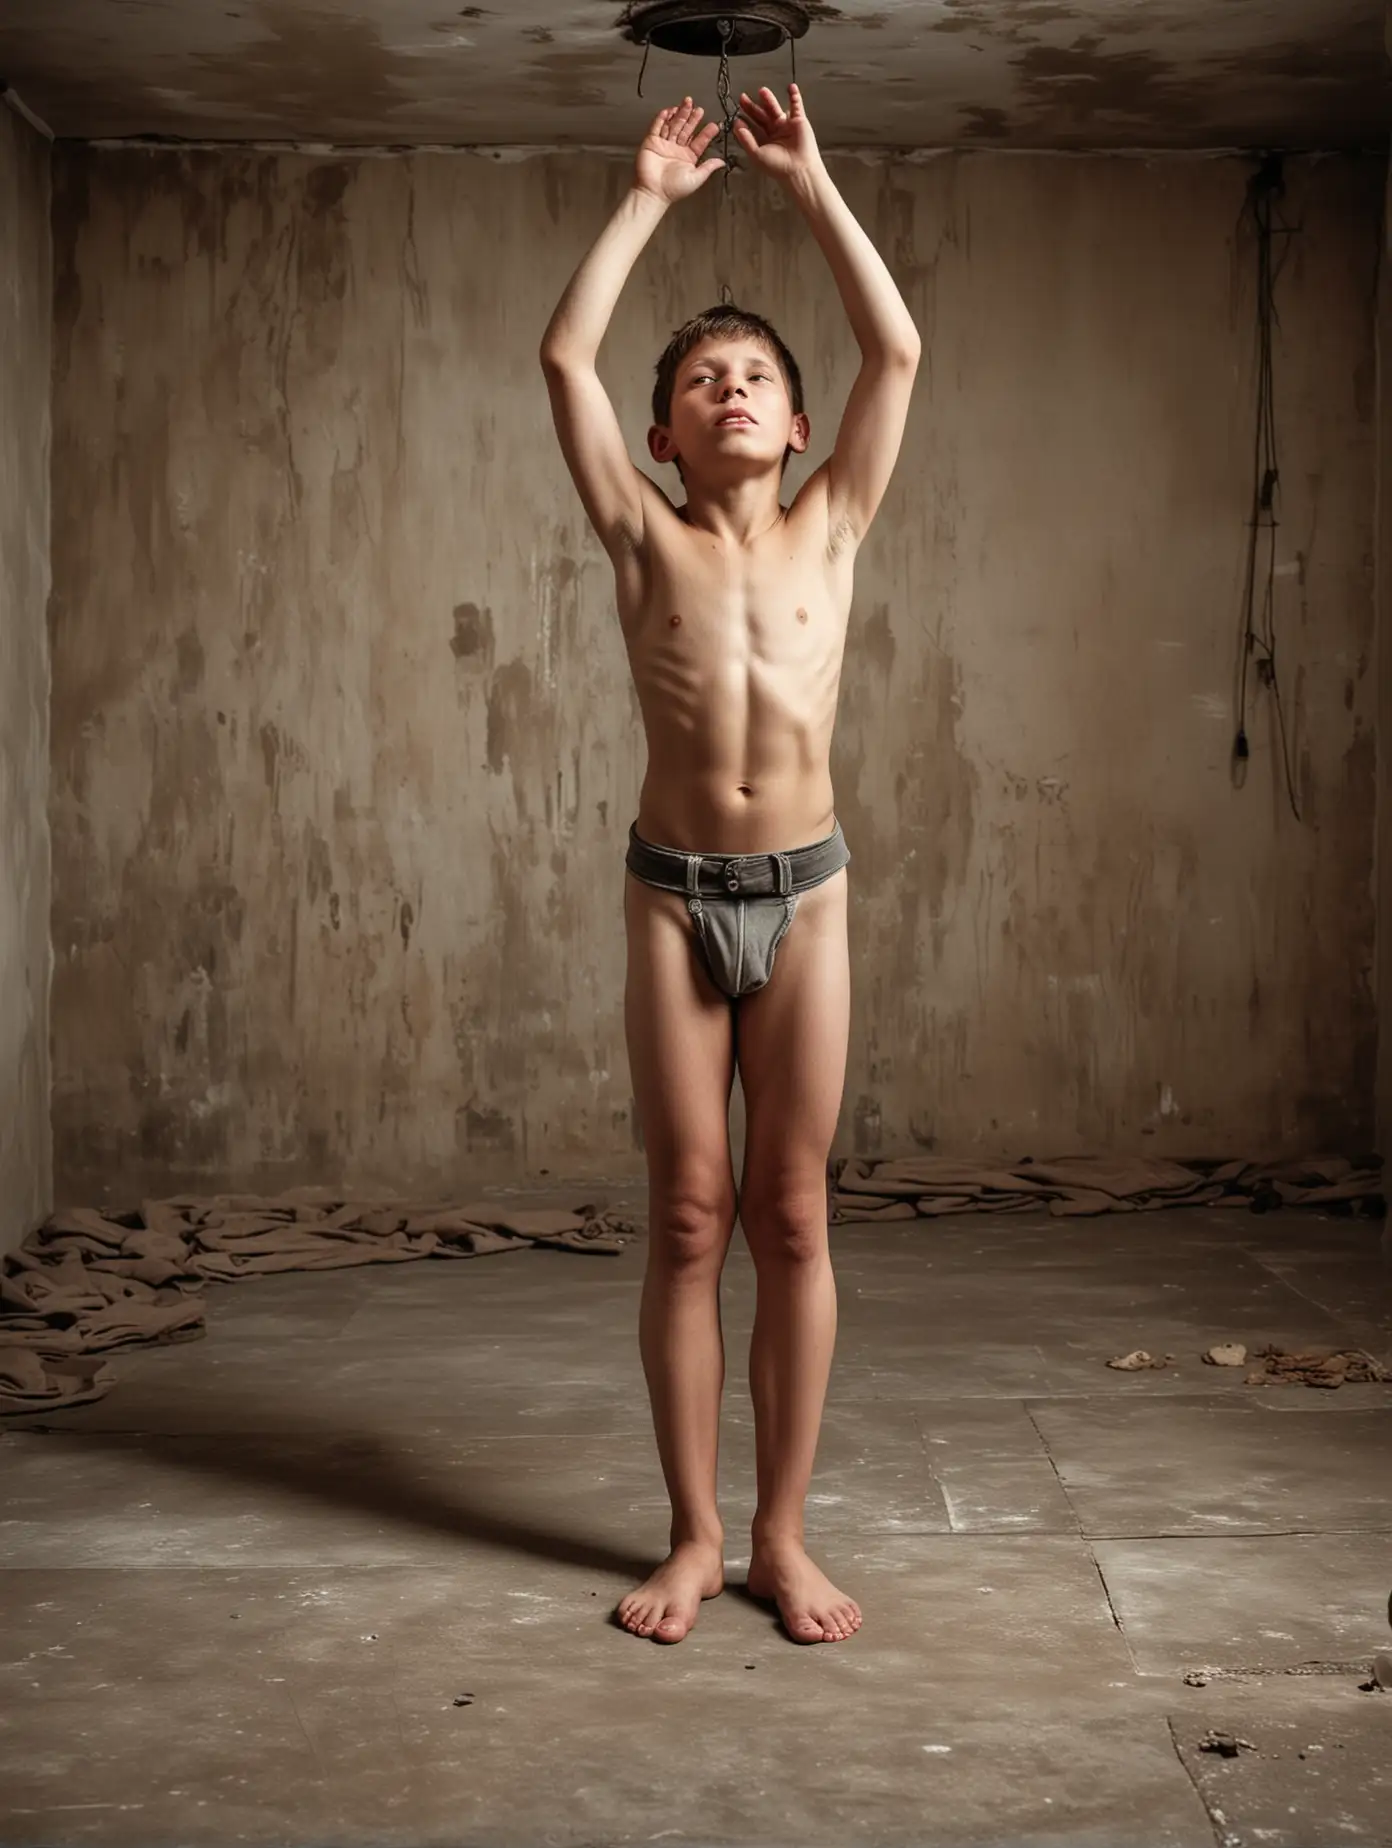 A realistic photo of a 13 years old shirtless, barefooted Russian boy stands on the floor with holding his hands up above his head, waiting for getting executed or killed by enemy soldiers in prison Execution room of a Gulag, face scared with tears, Front view, wide-range view, feet visible